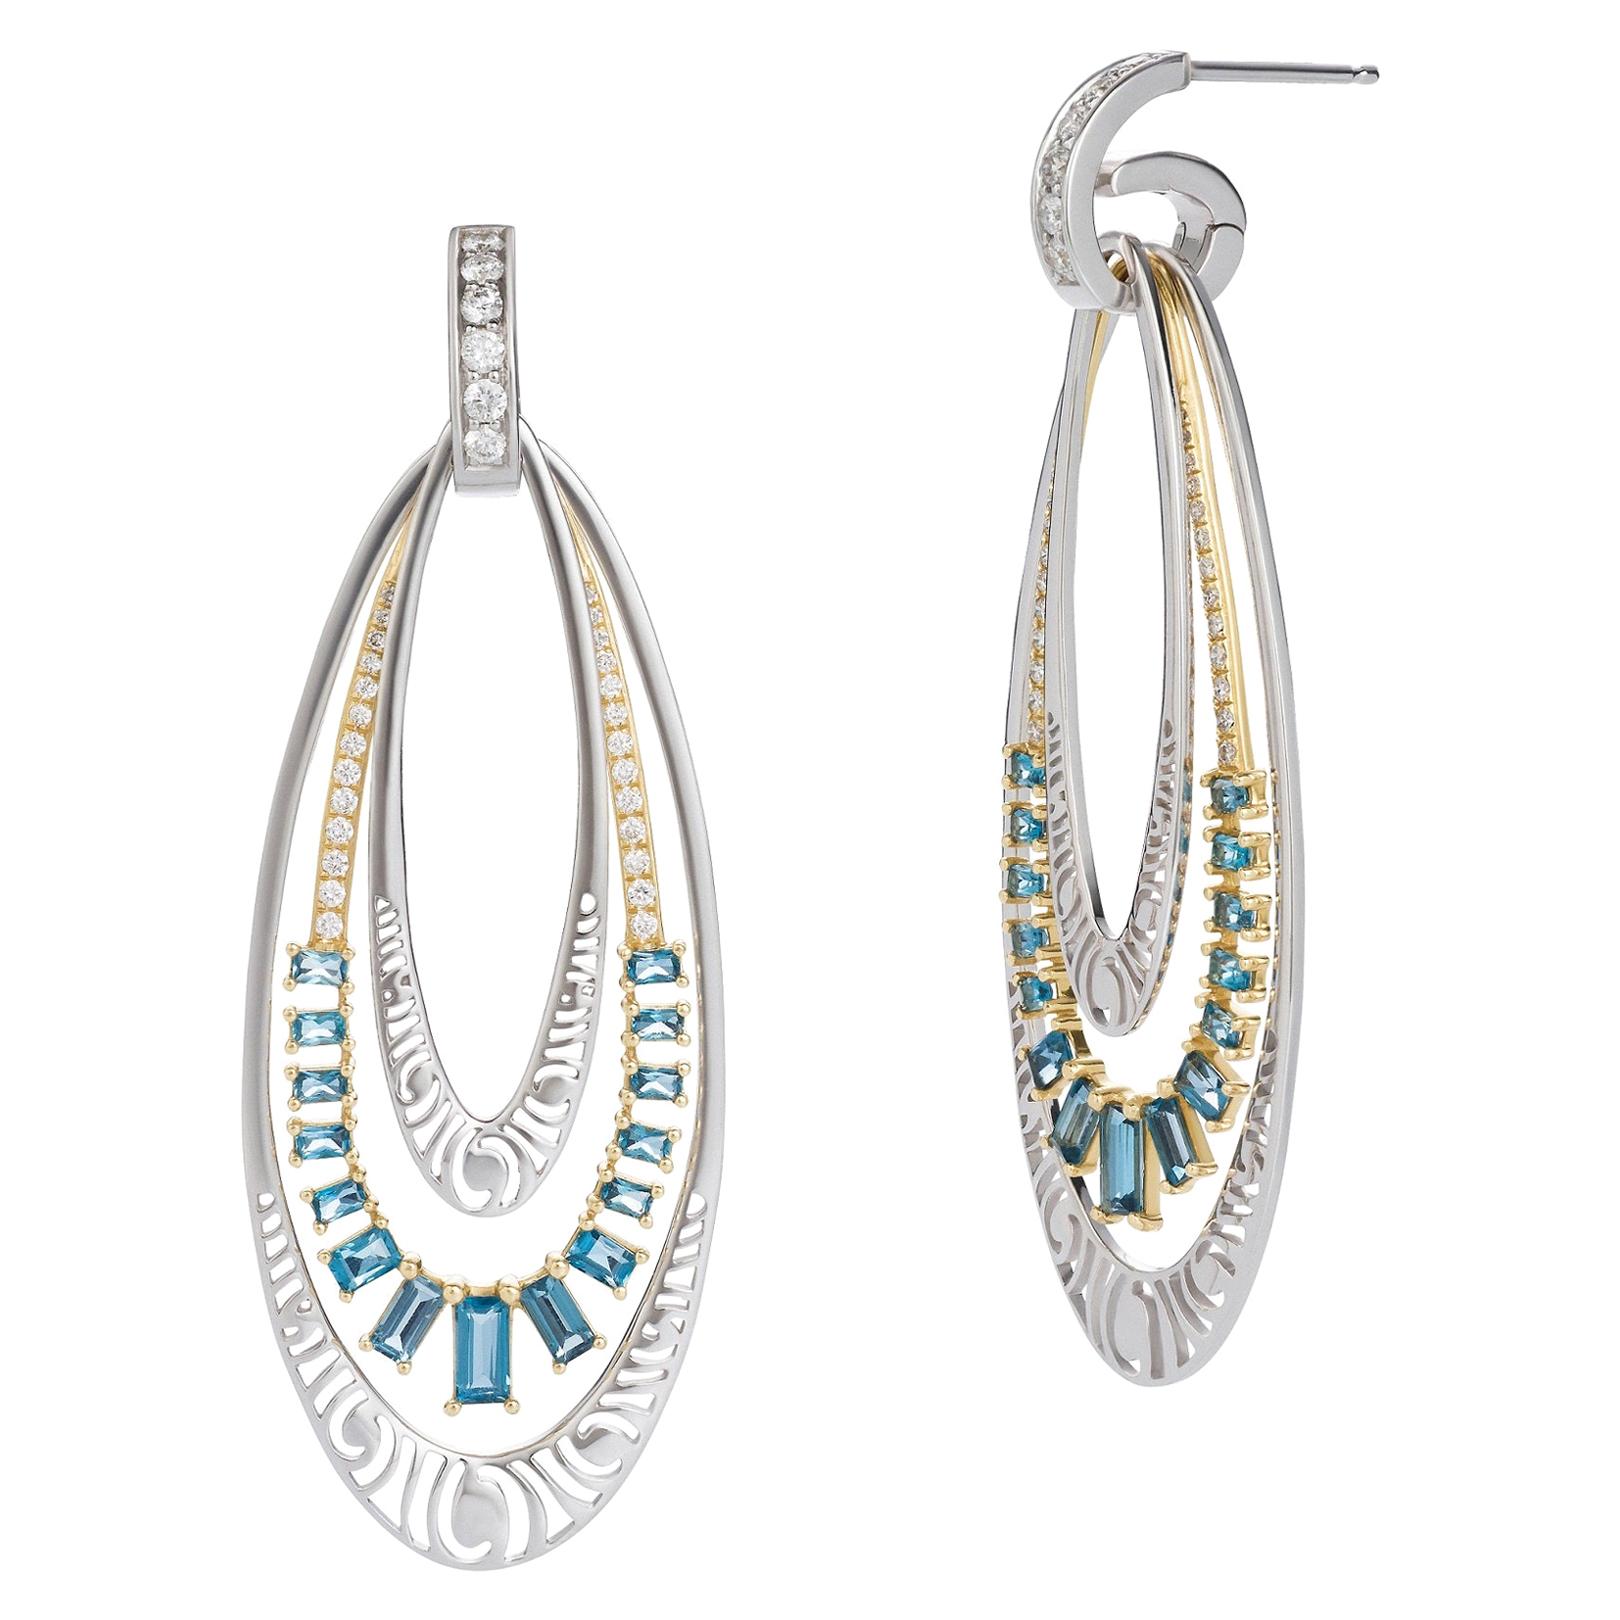 Interchangeable Earrings in Gold with Diamonds and London Blue Topaz Baguettes